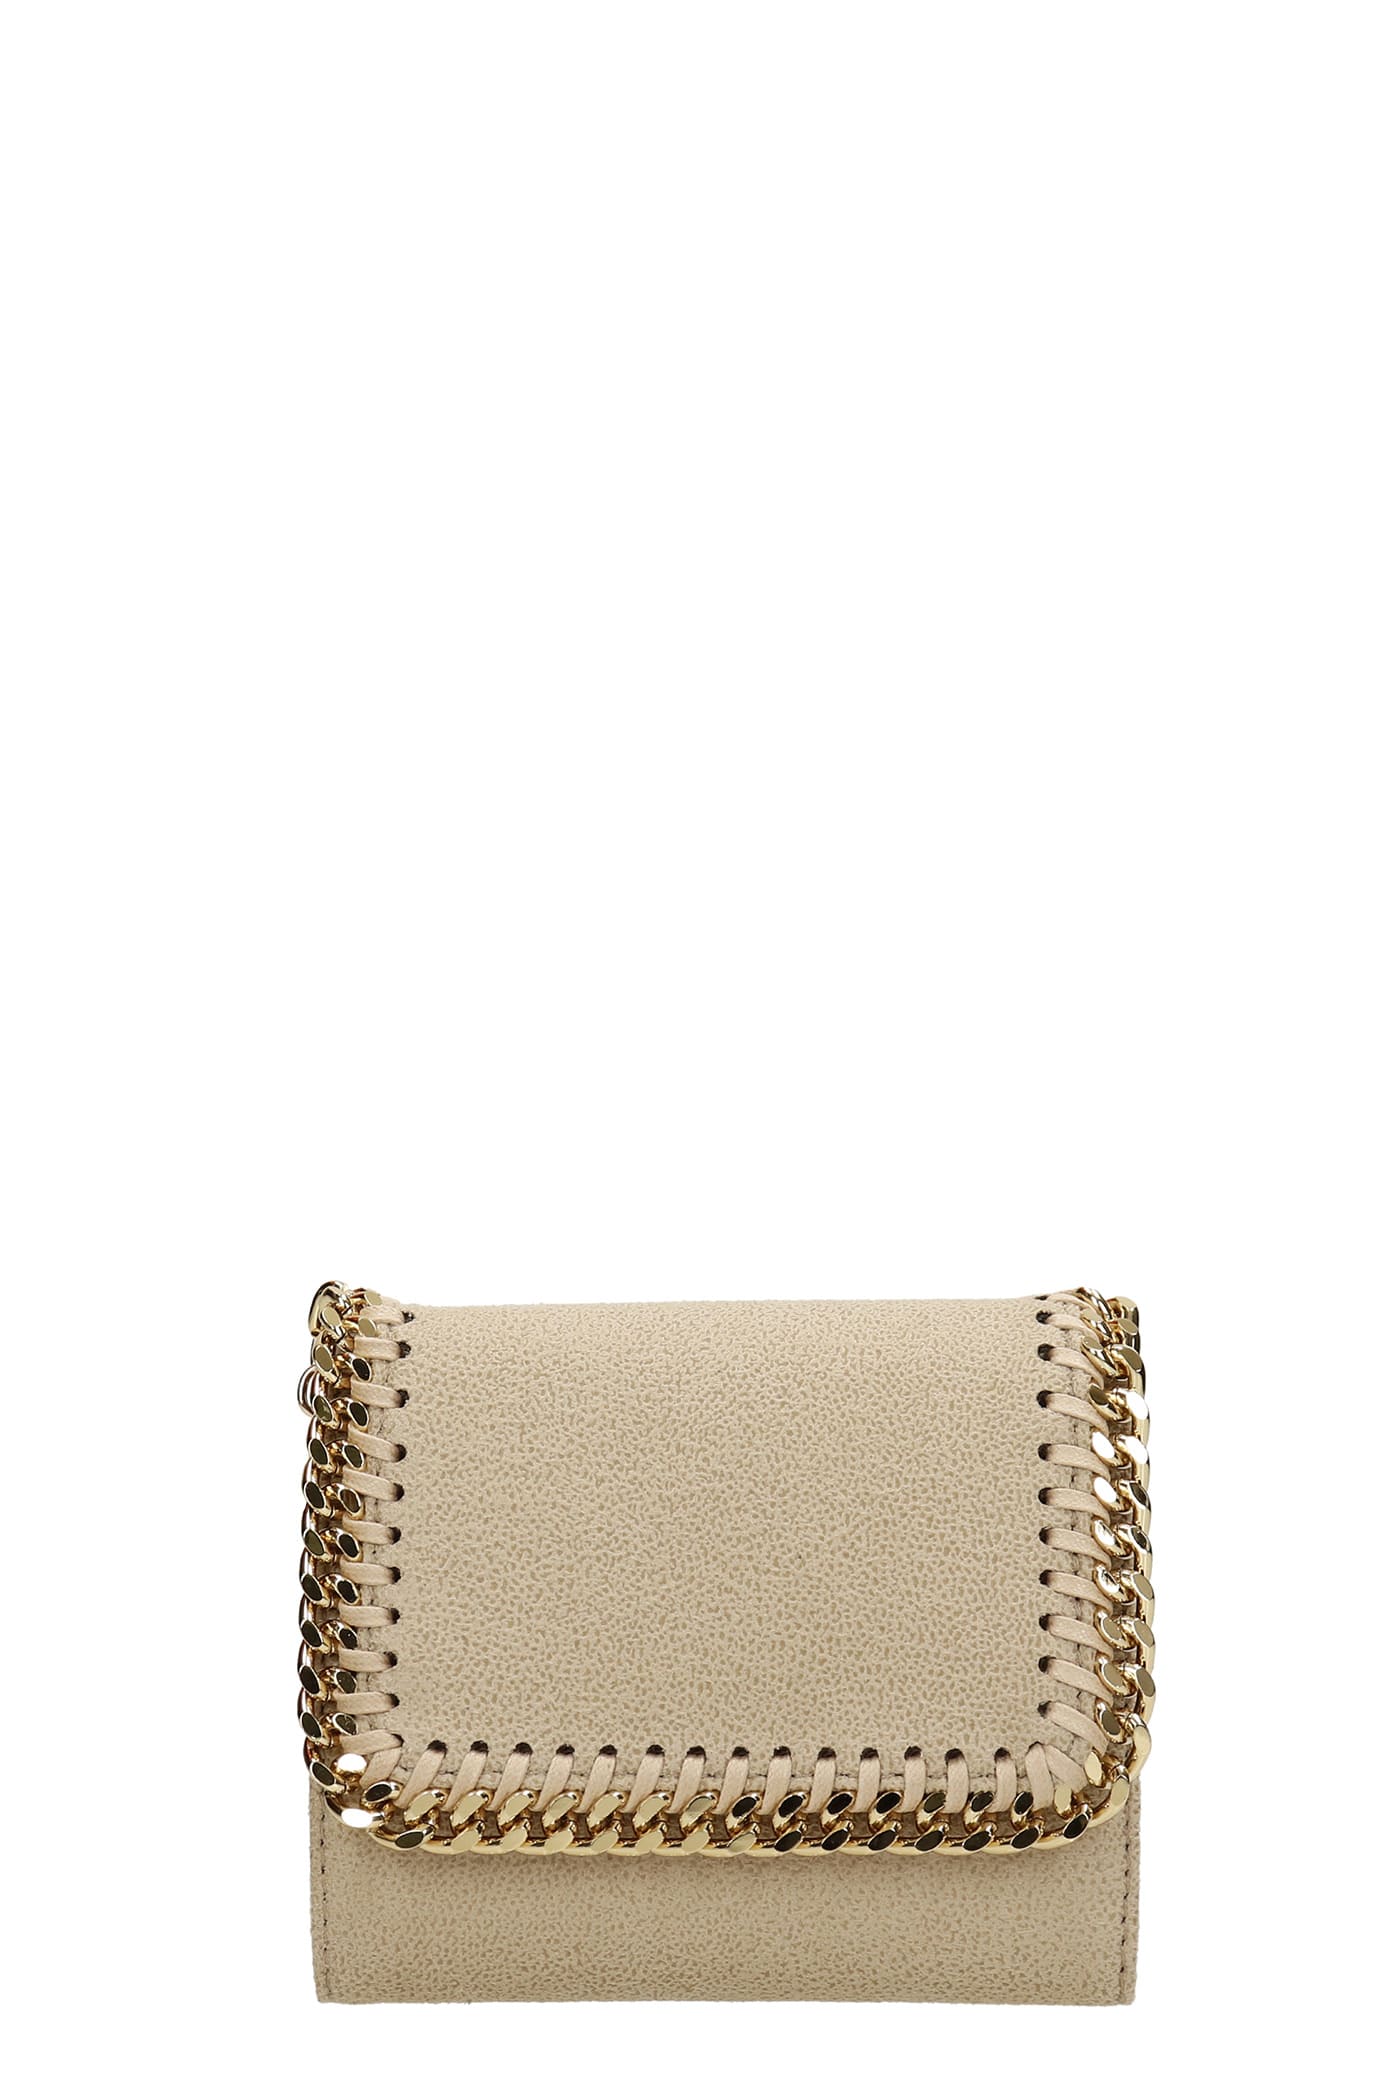 Stella McCartney Falabella Wallet In Taupe Faux Leather